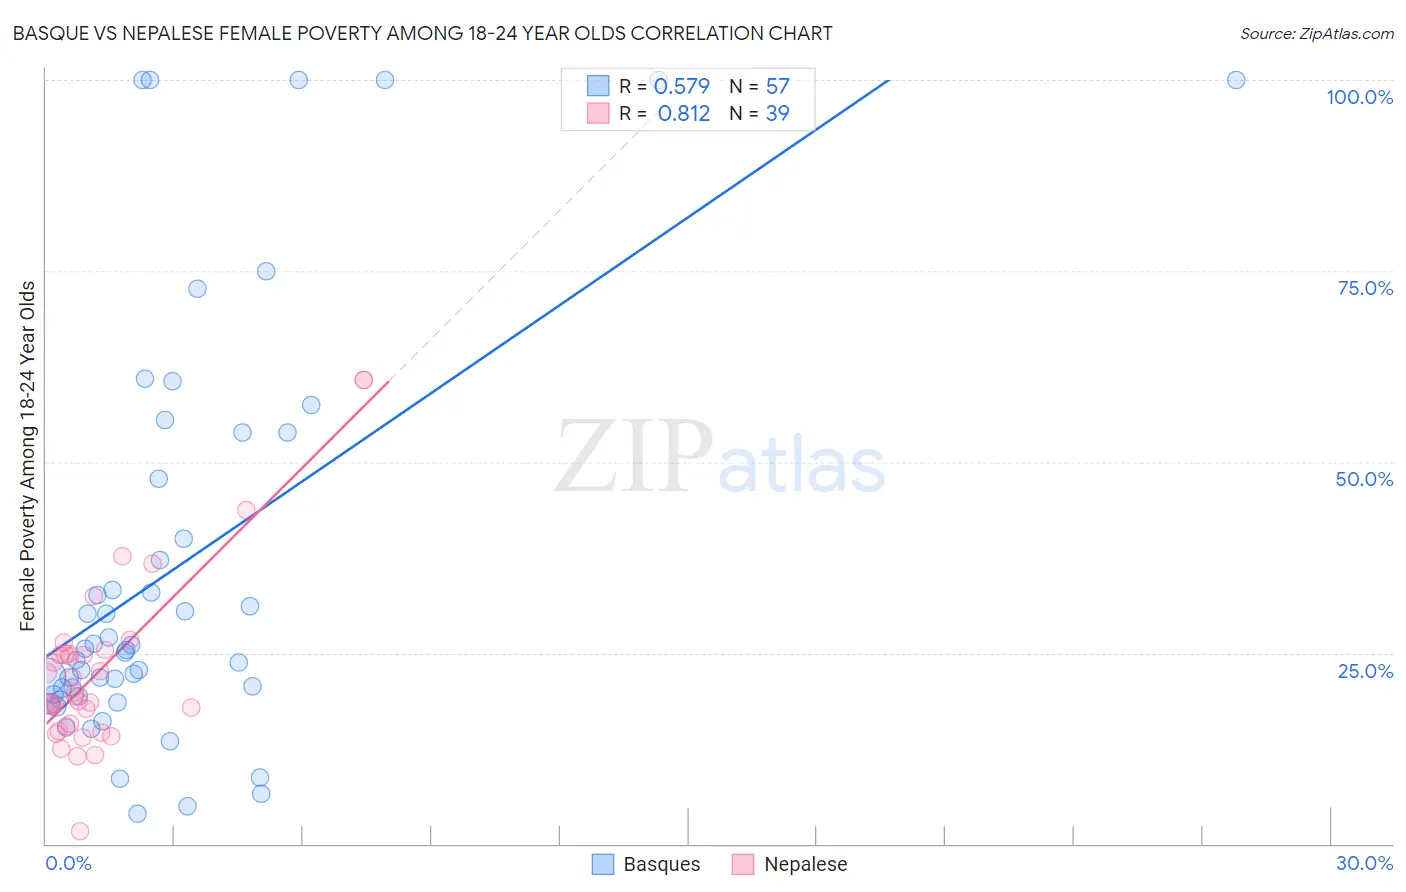 Basque vs Nepalese Female Poverty Among 18-24 Year Olds